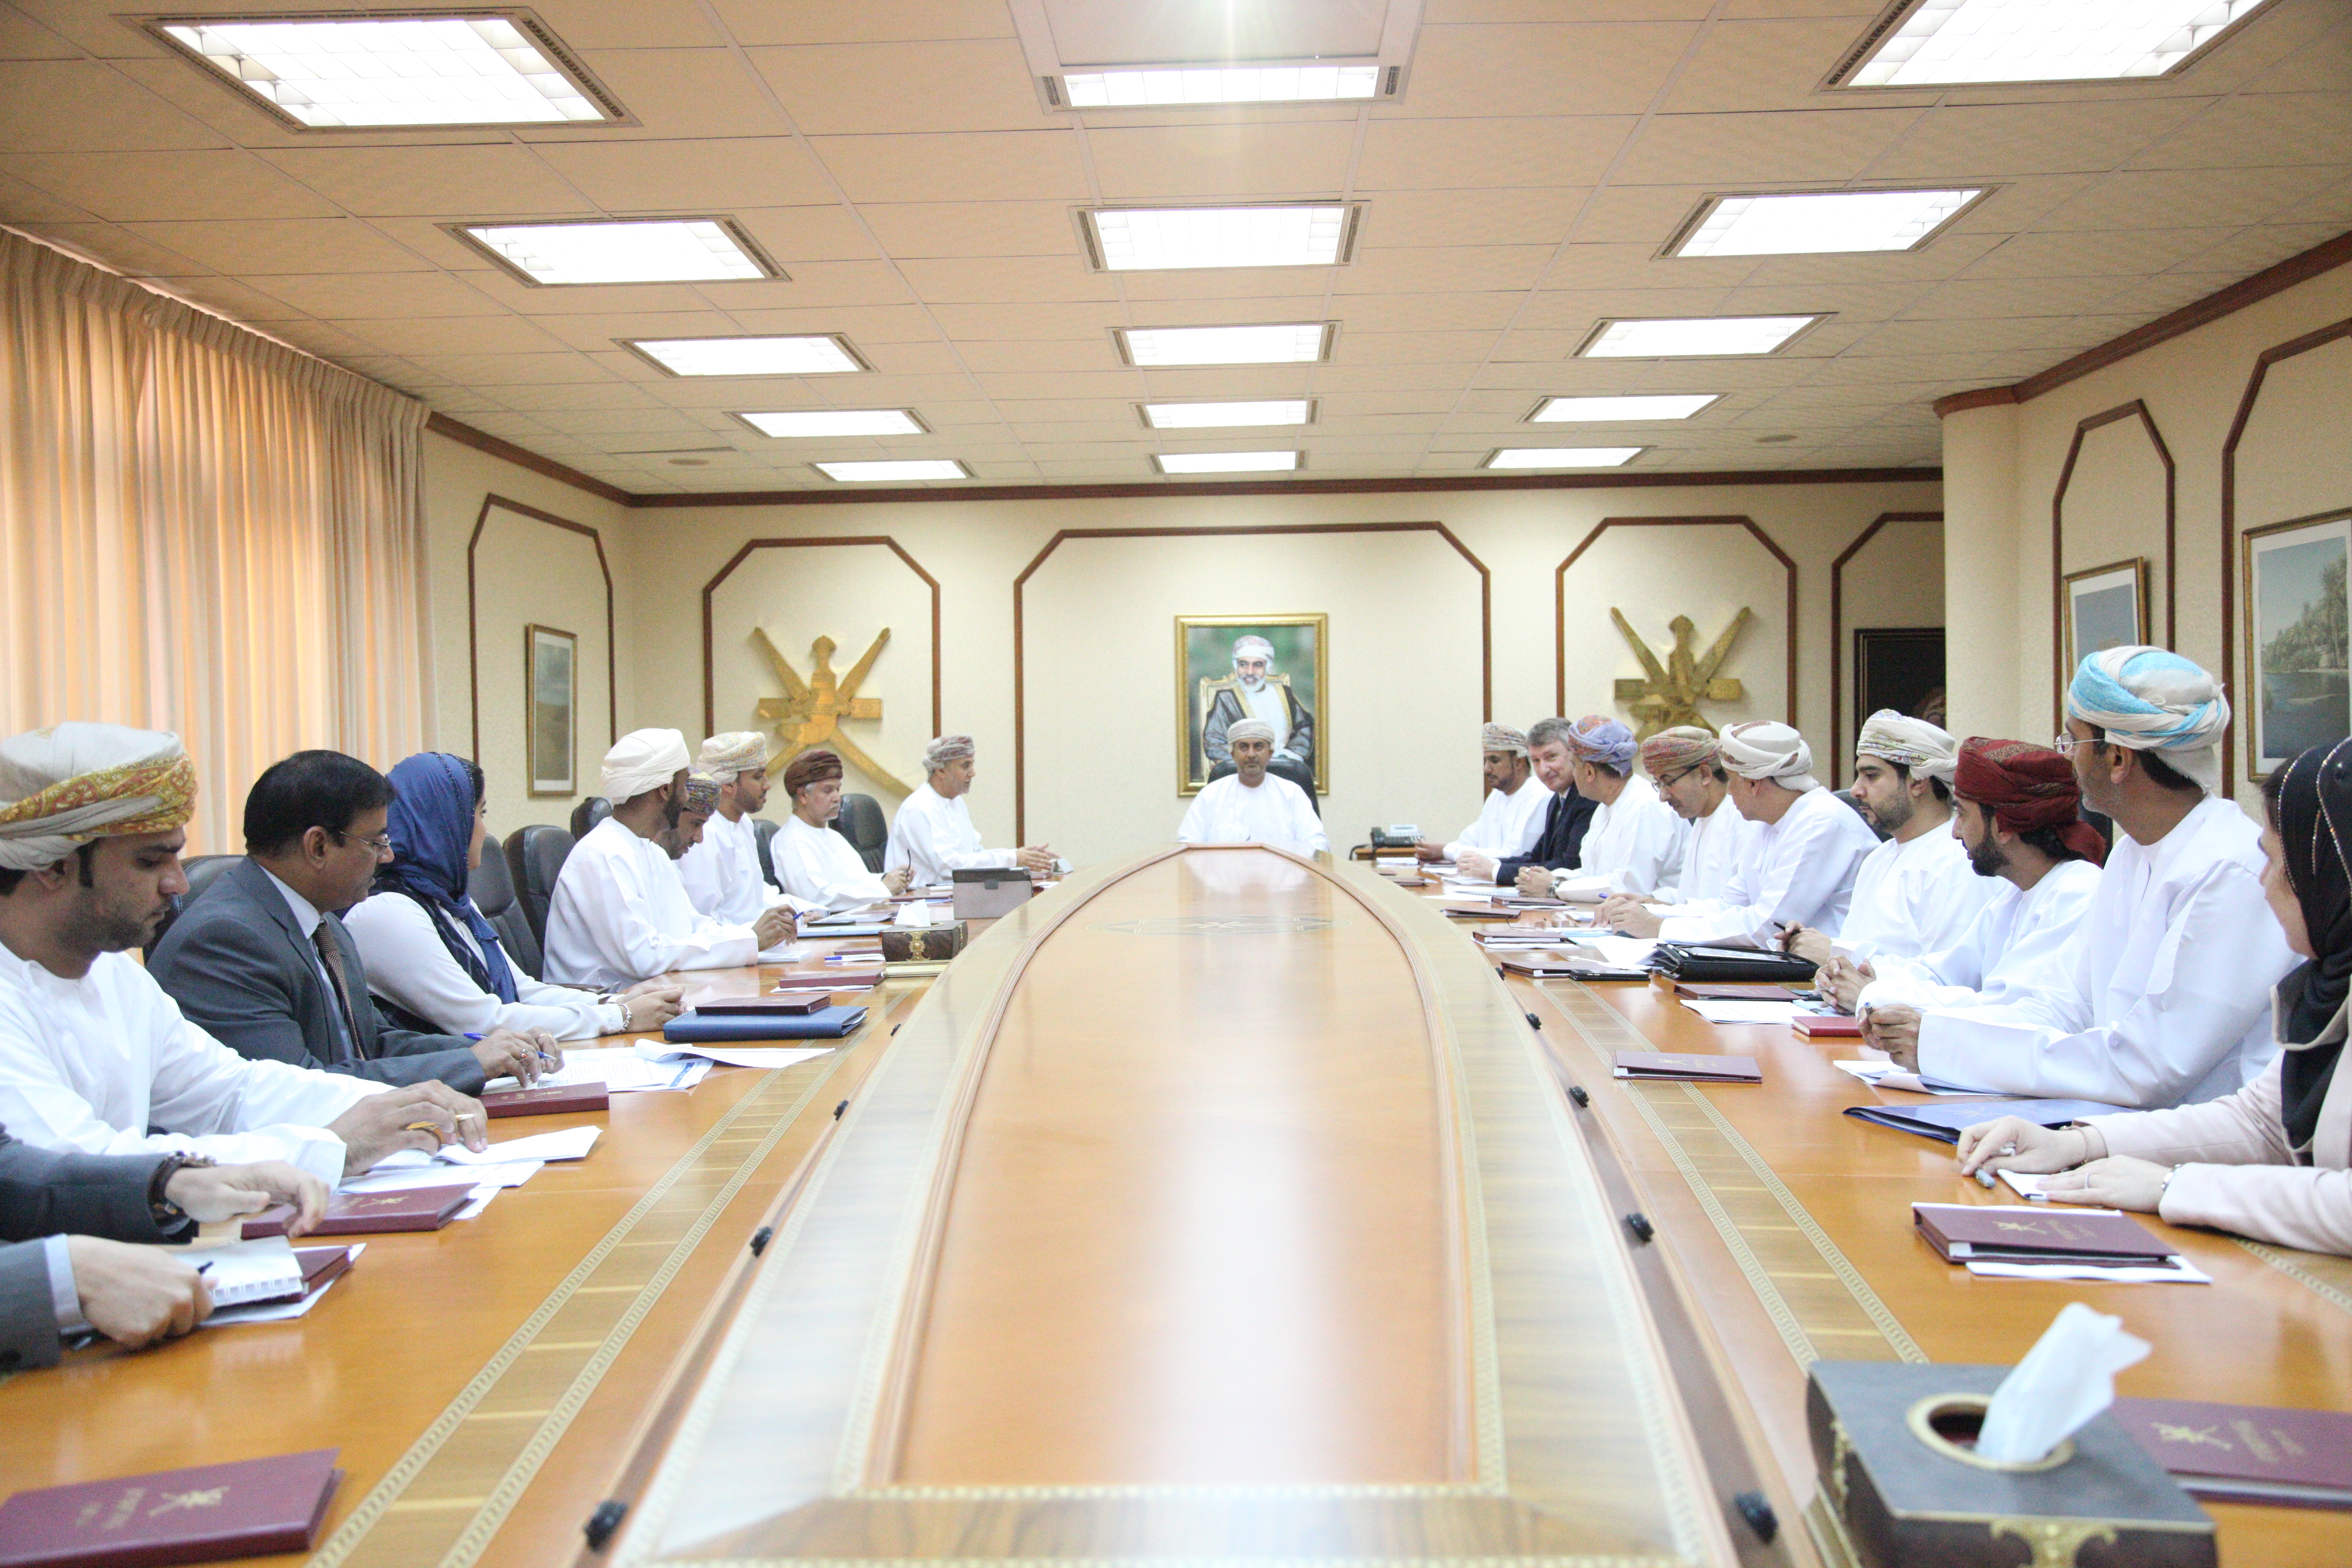 Progress of Oman's manufacturing sector in implementing Tanfeedh initiatives reviewed